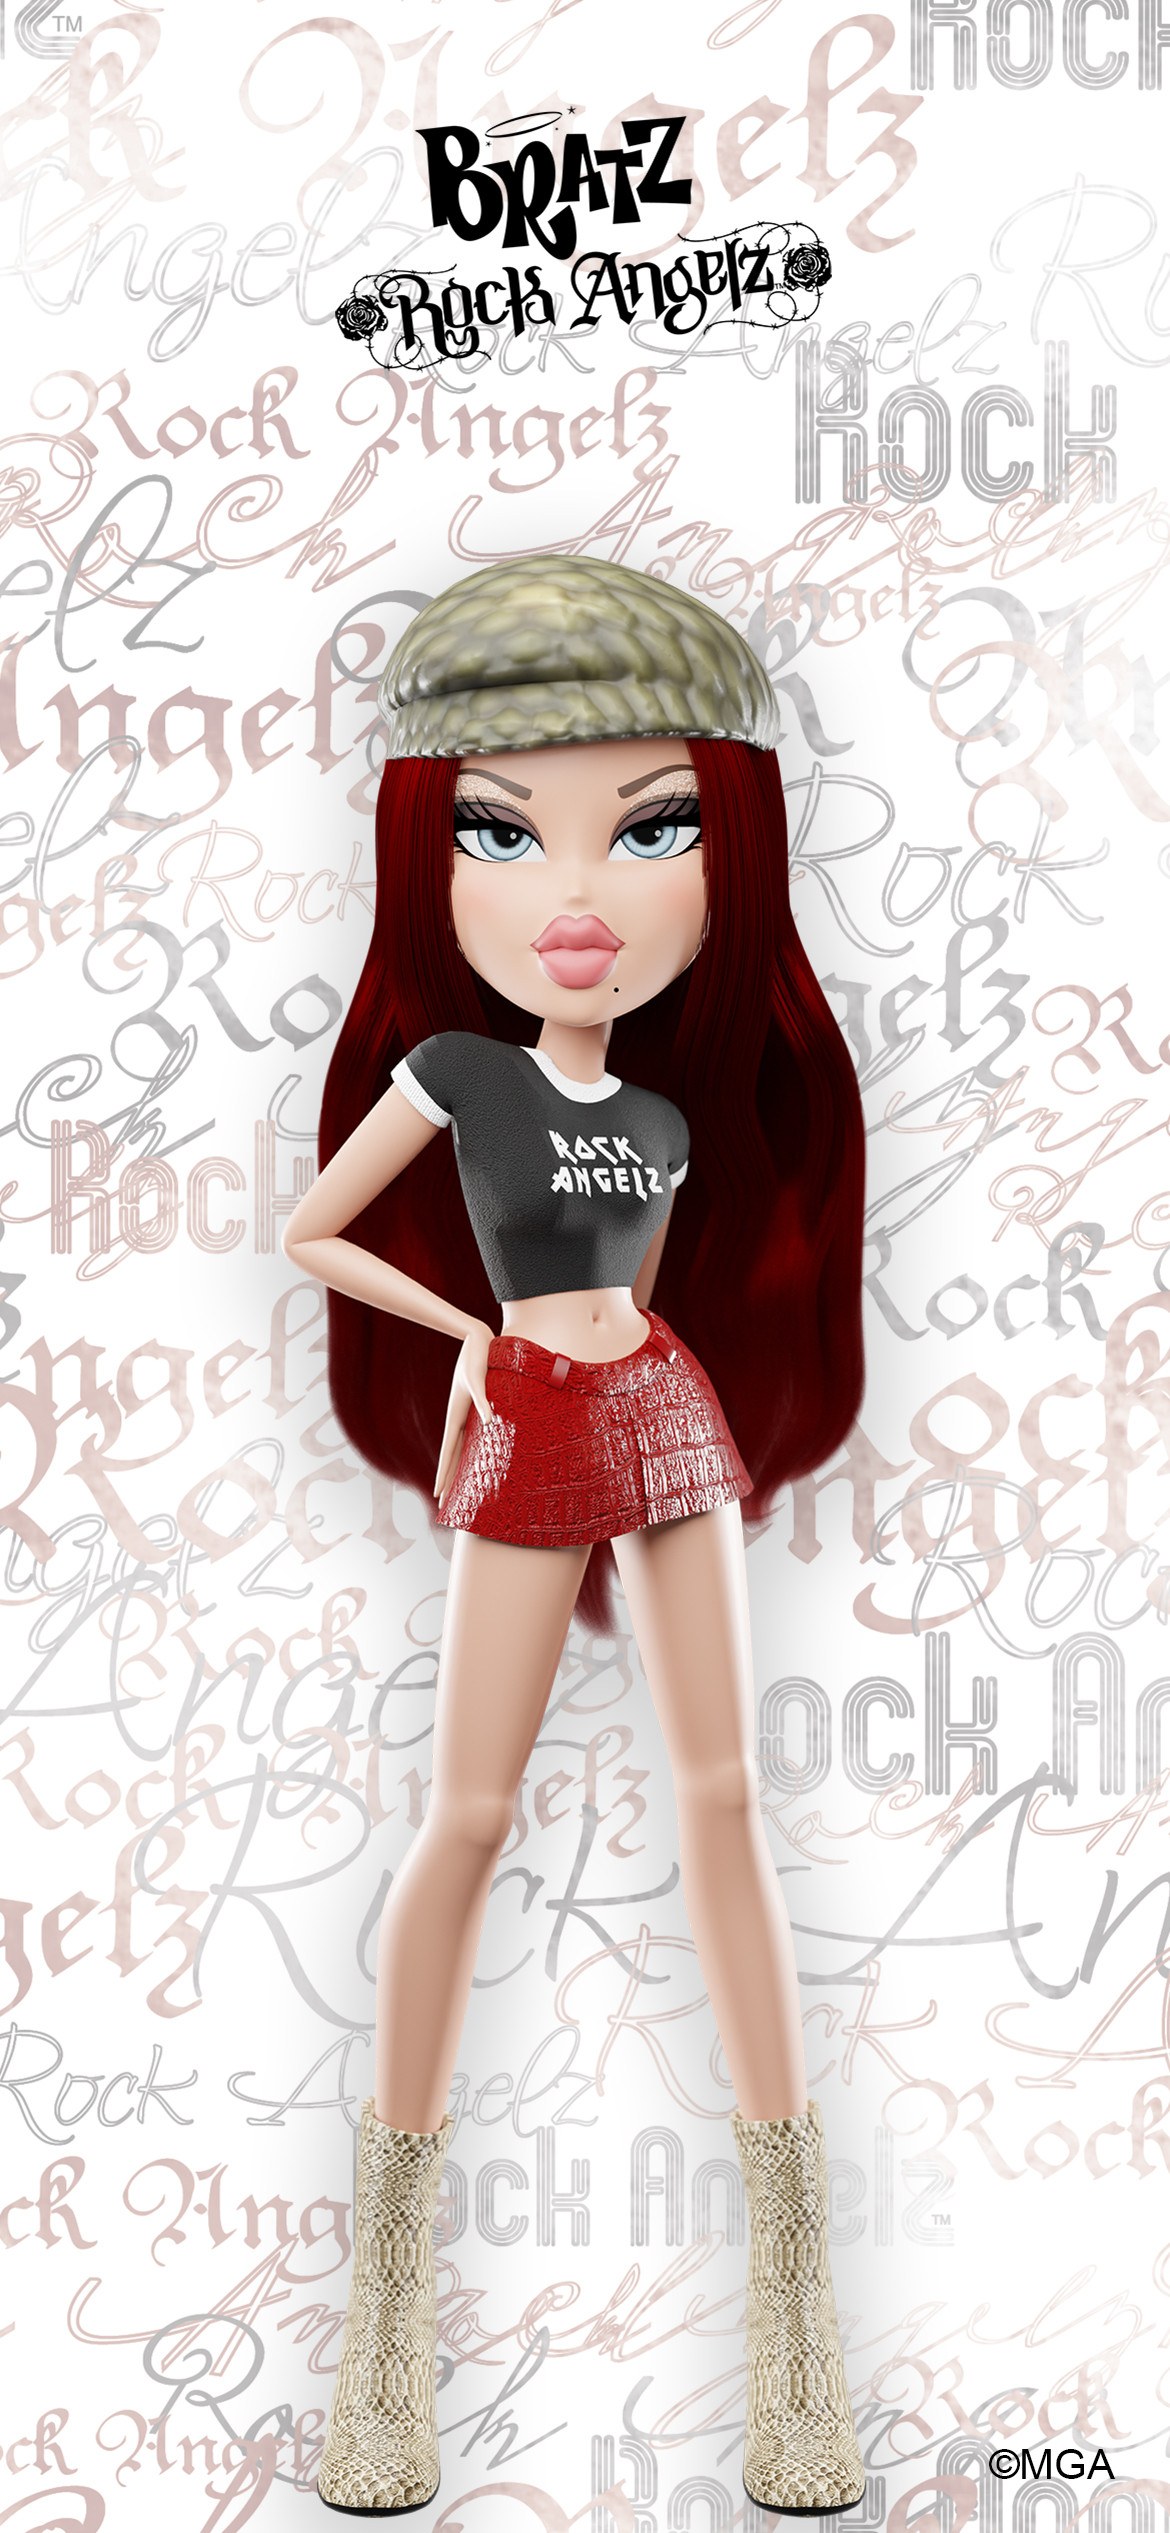 The Rock Angelz doll is wearing a black crop top, red skirt, gold boots and a camo green hat. - Bratz